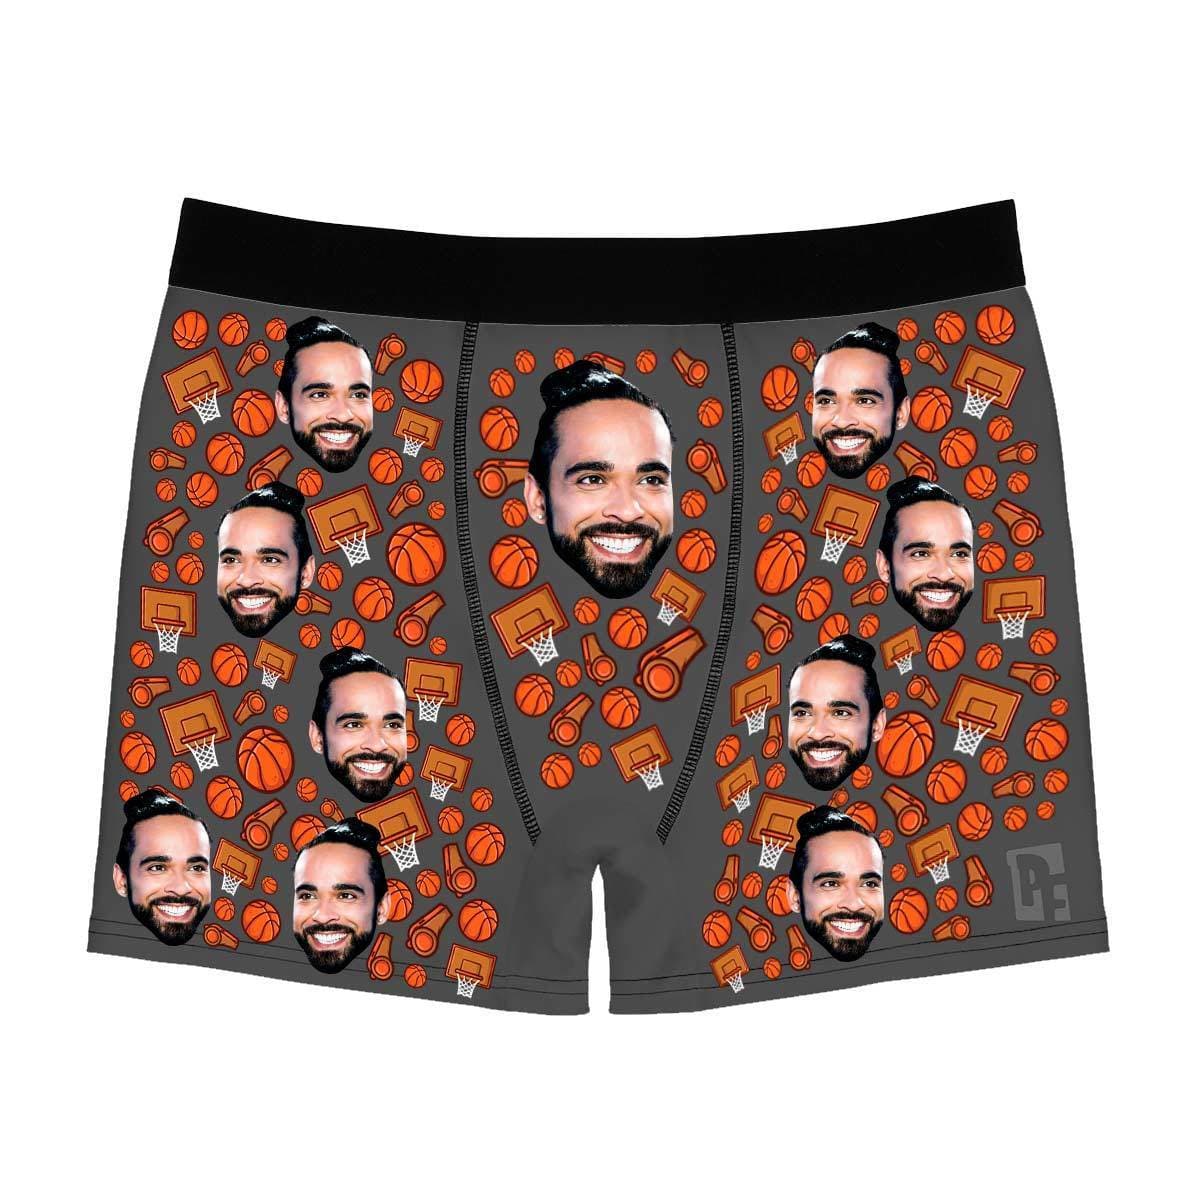 Dark Basketball men's boxer briefs personalized with photo printed on them